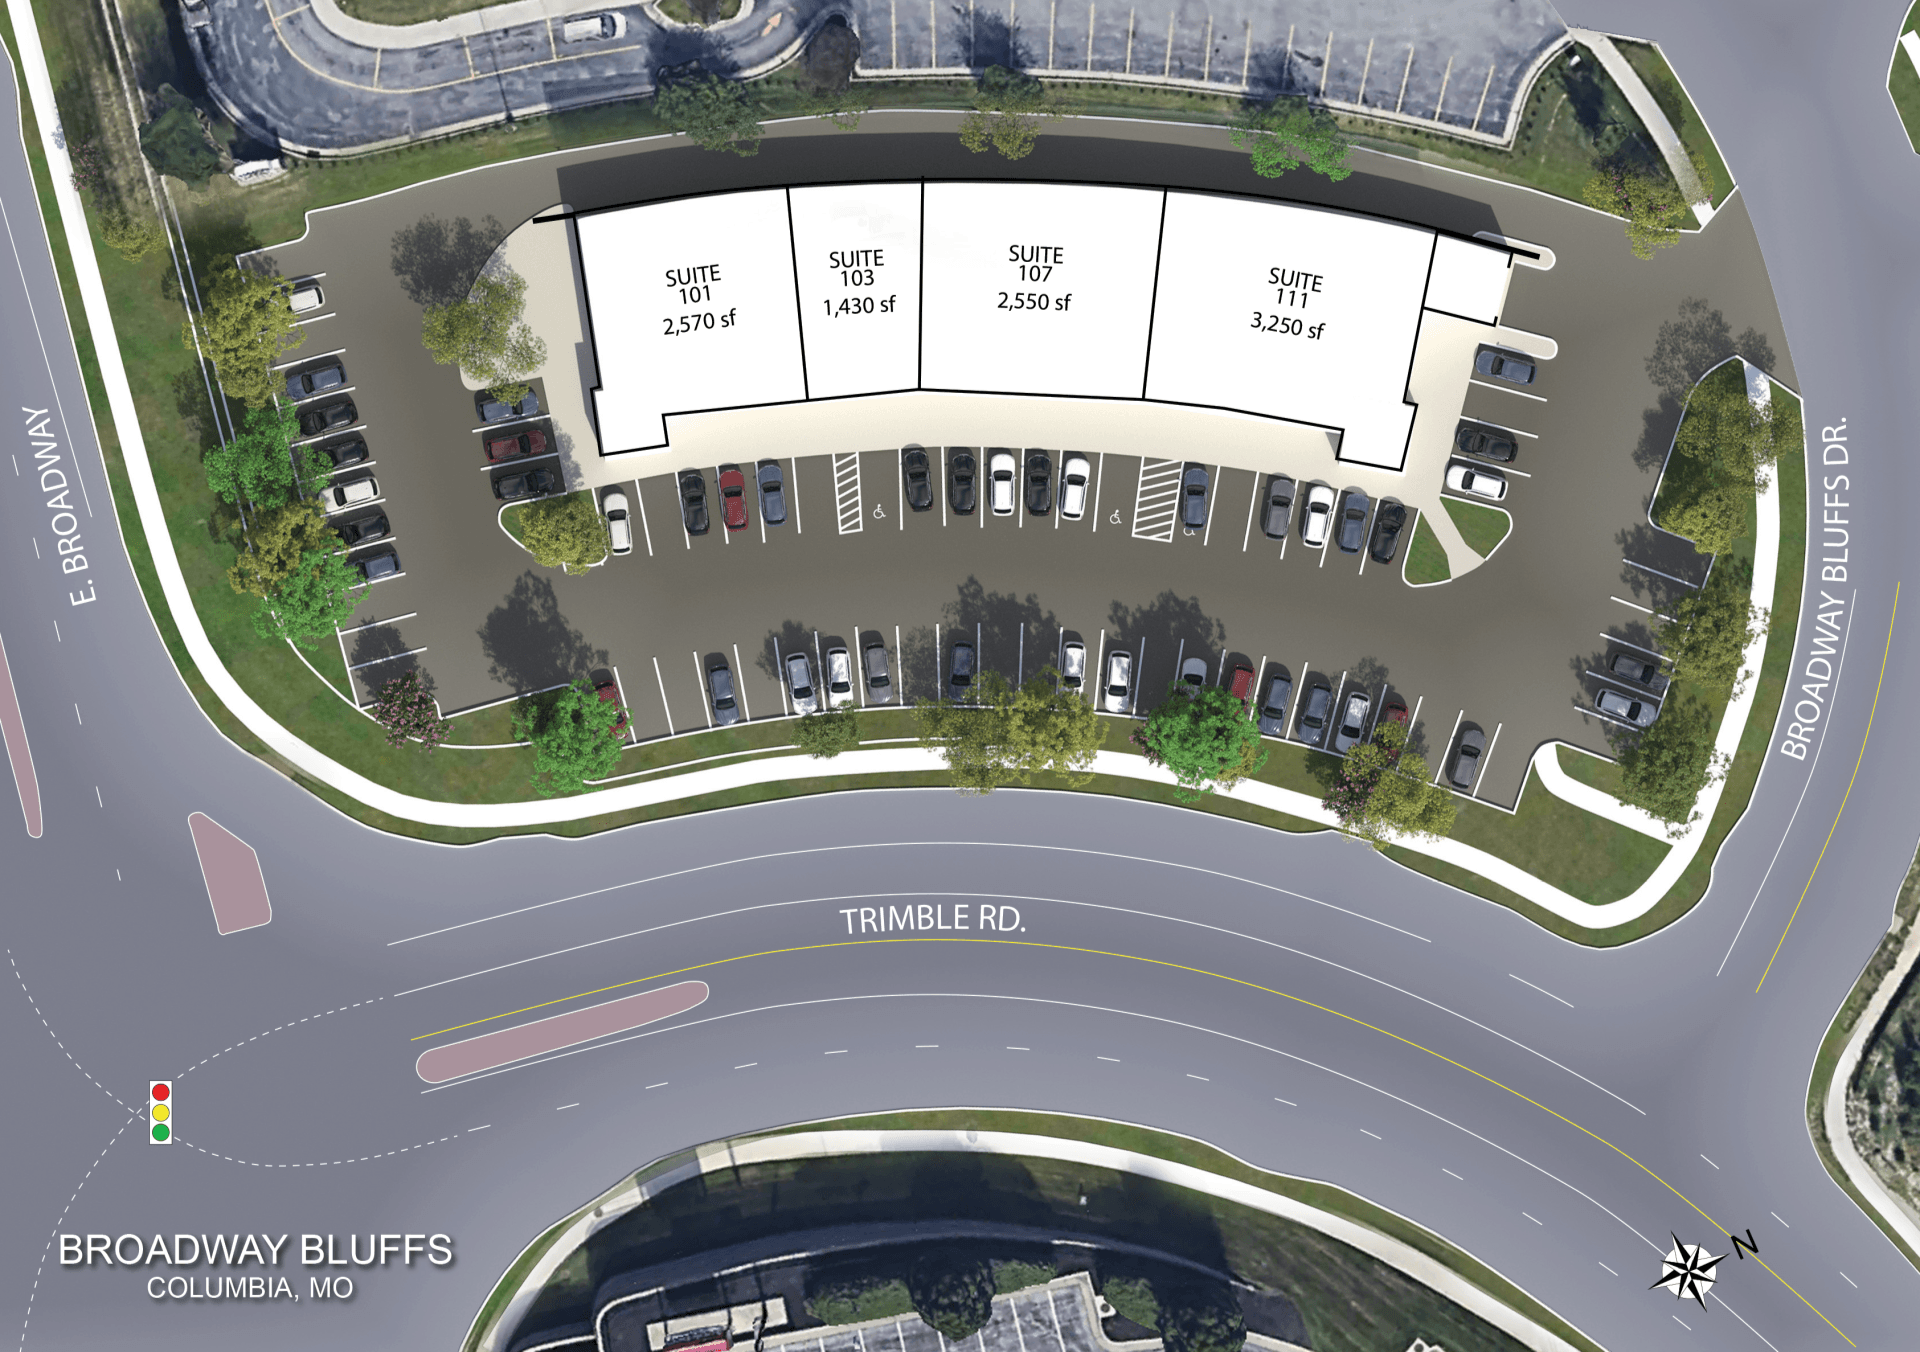 Site Plan of Broadway Bluffs in Columbia, MO. Learn More at Lindner Properties